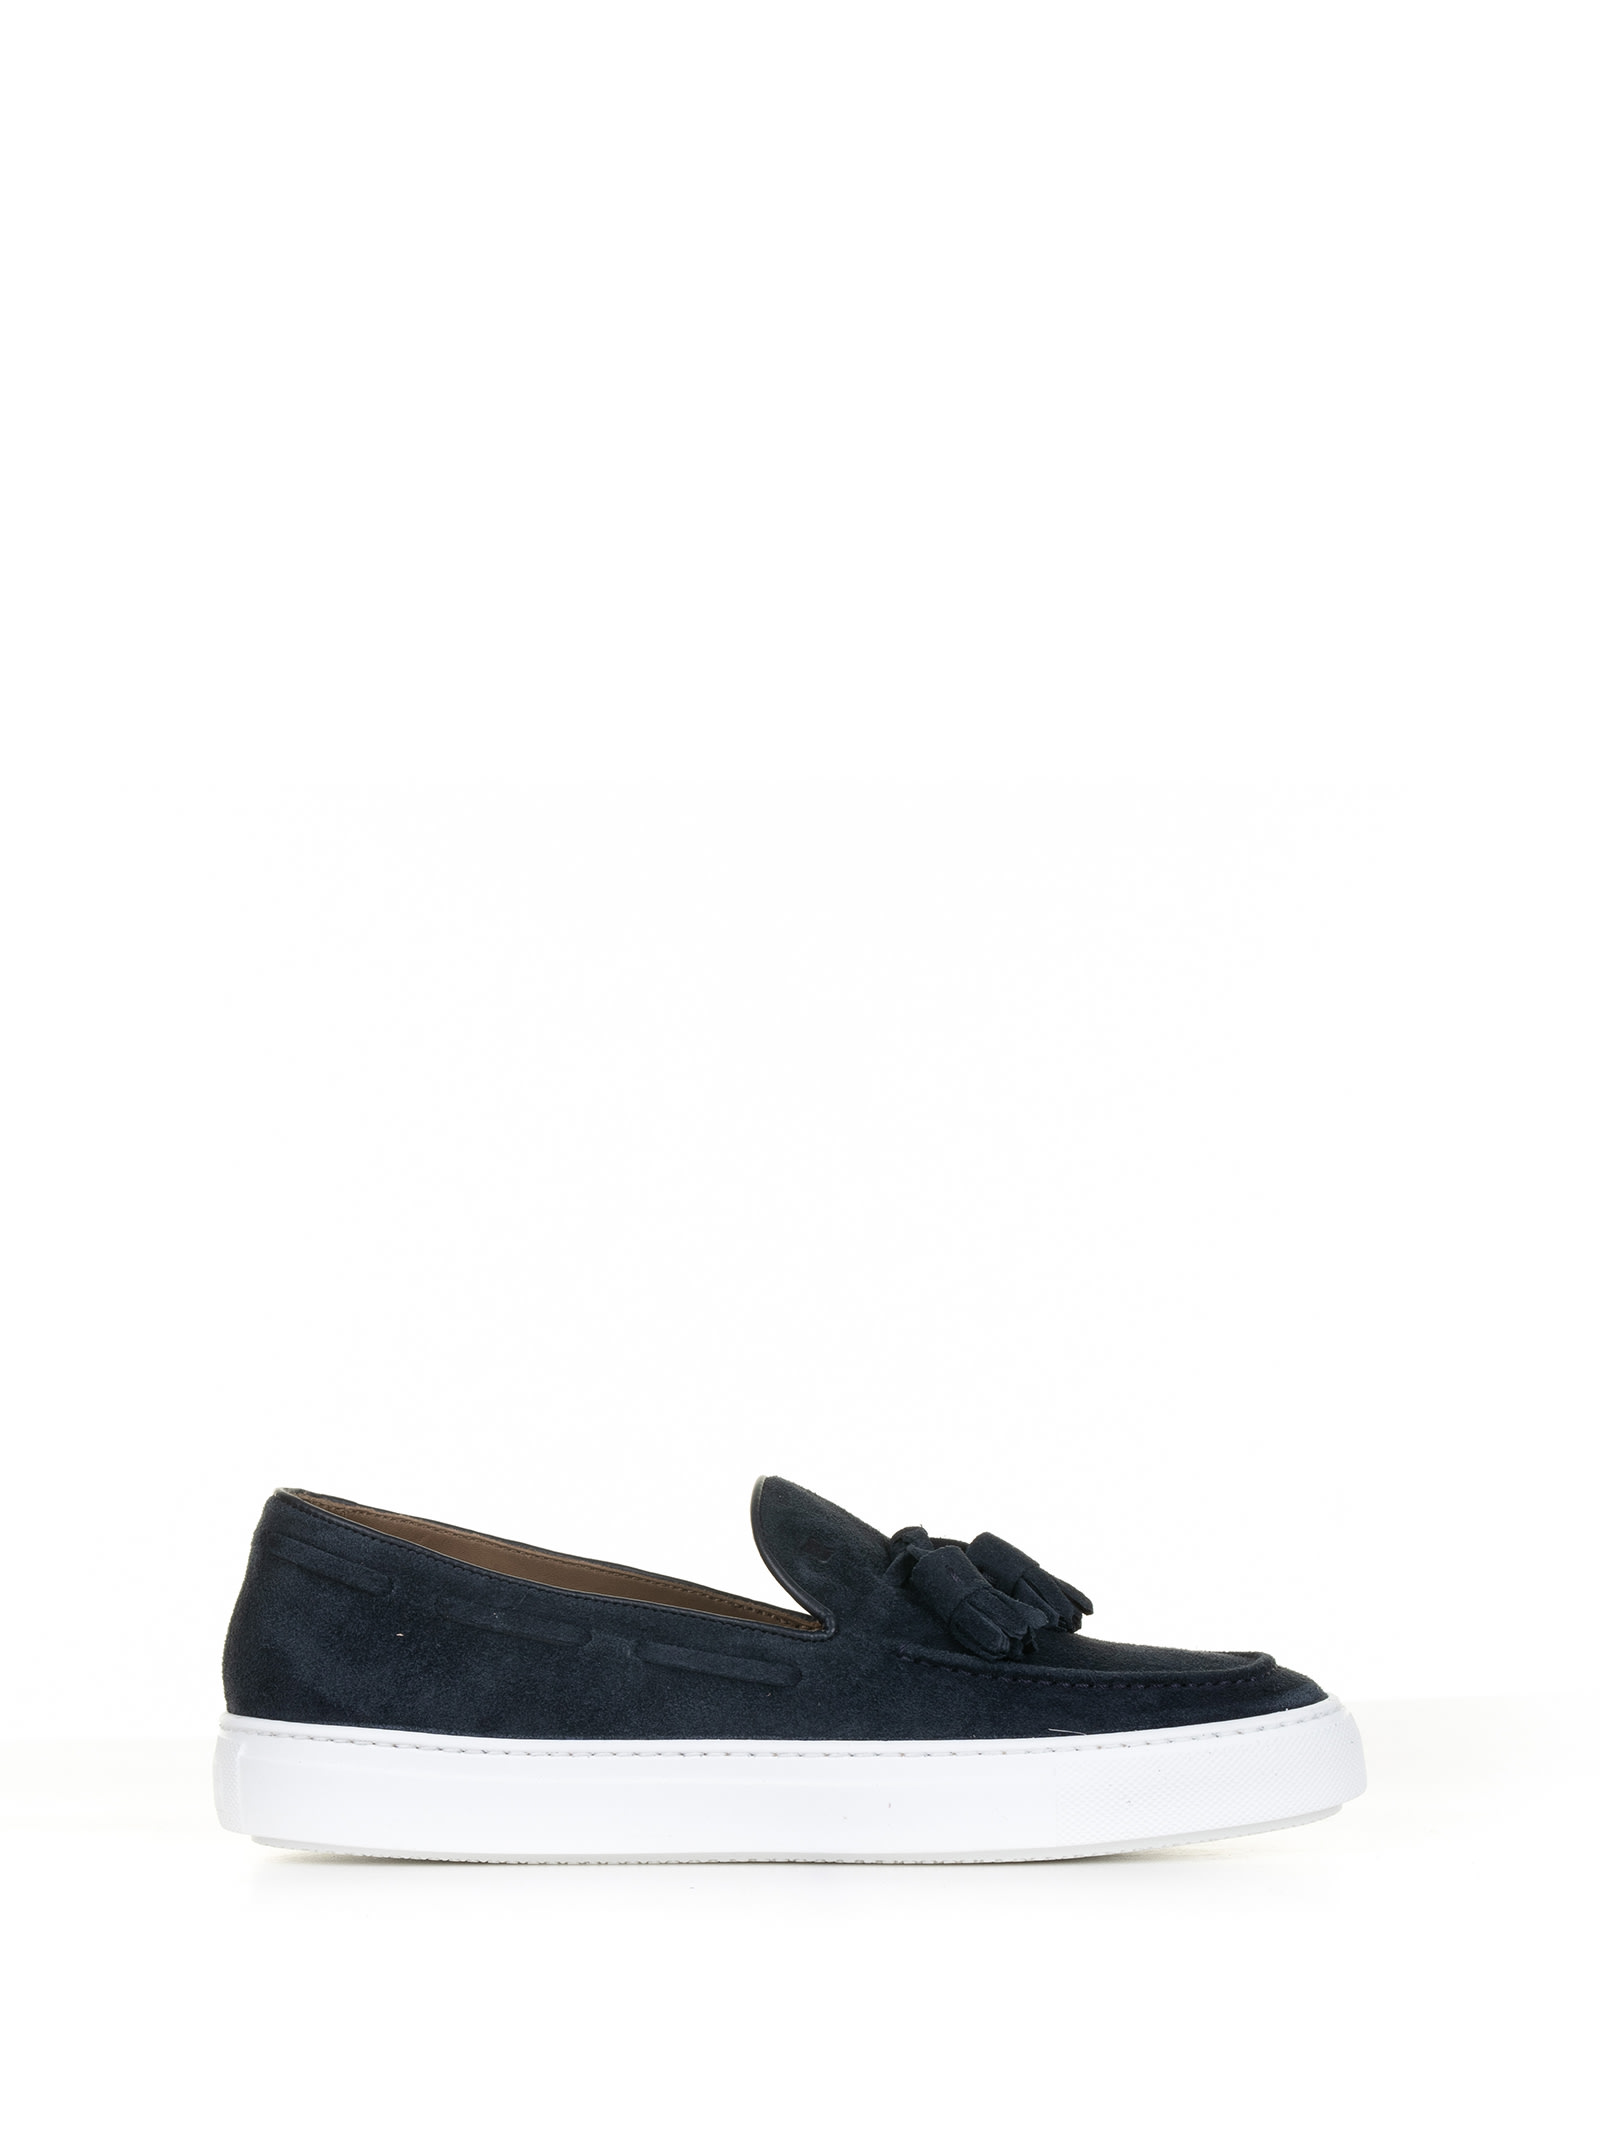 Moccasin In Blue Suede And Rubber Sole